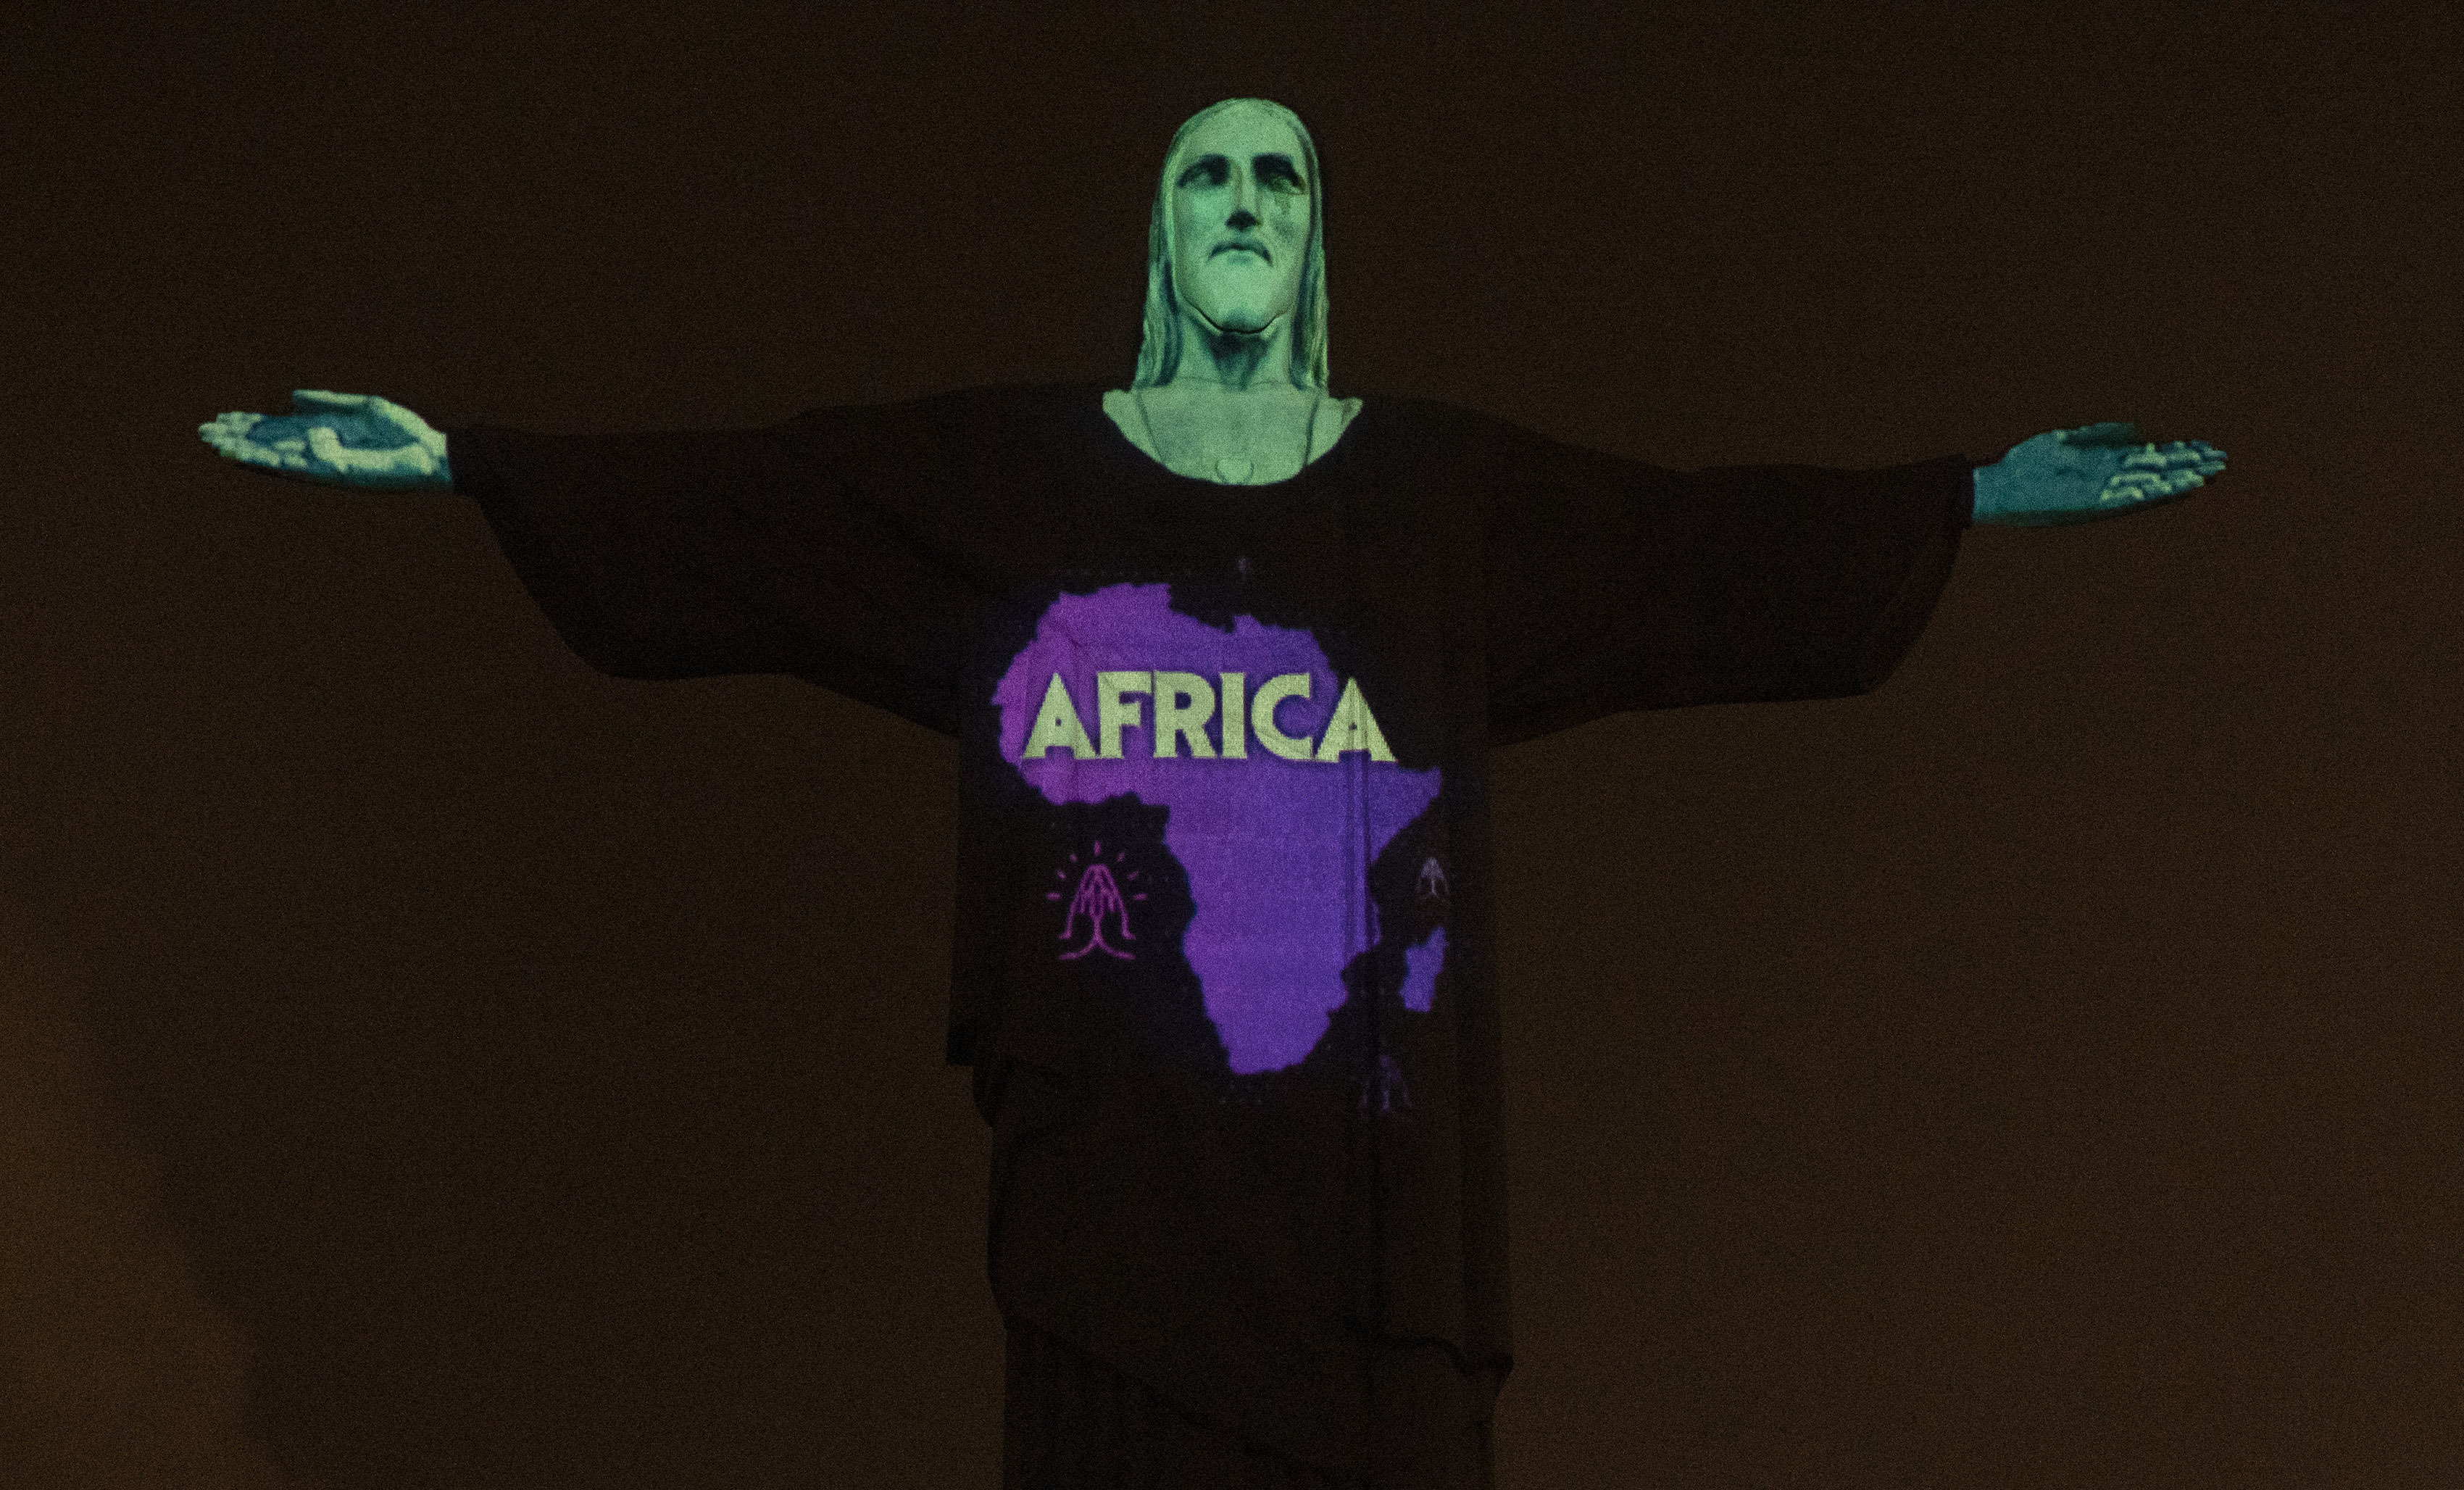 Rio's Christ the Redeemer statue is lit up with the map and word Africa, in support of those afflicted by the new coronavirus, in Rio de Janeiro, Brazil, Wednesday, March 18, 2020. For most people COVID-19 causes mild or moderate symptoms. For others, especially the elderly and people with existing health problems, it can cause many other serious illnesses, including pneumonia. (AP Photo/Silvia Izquierdo)